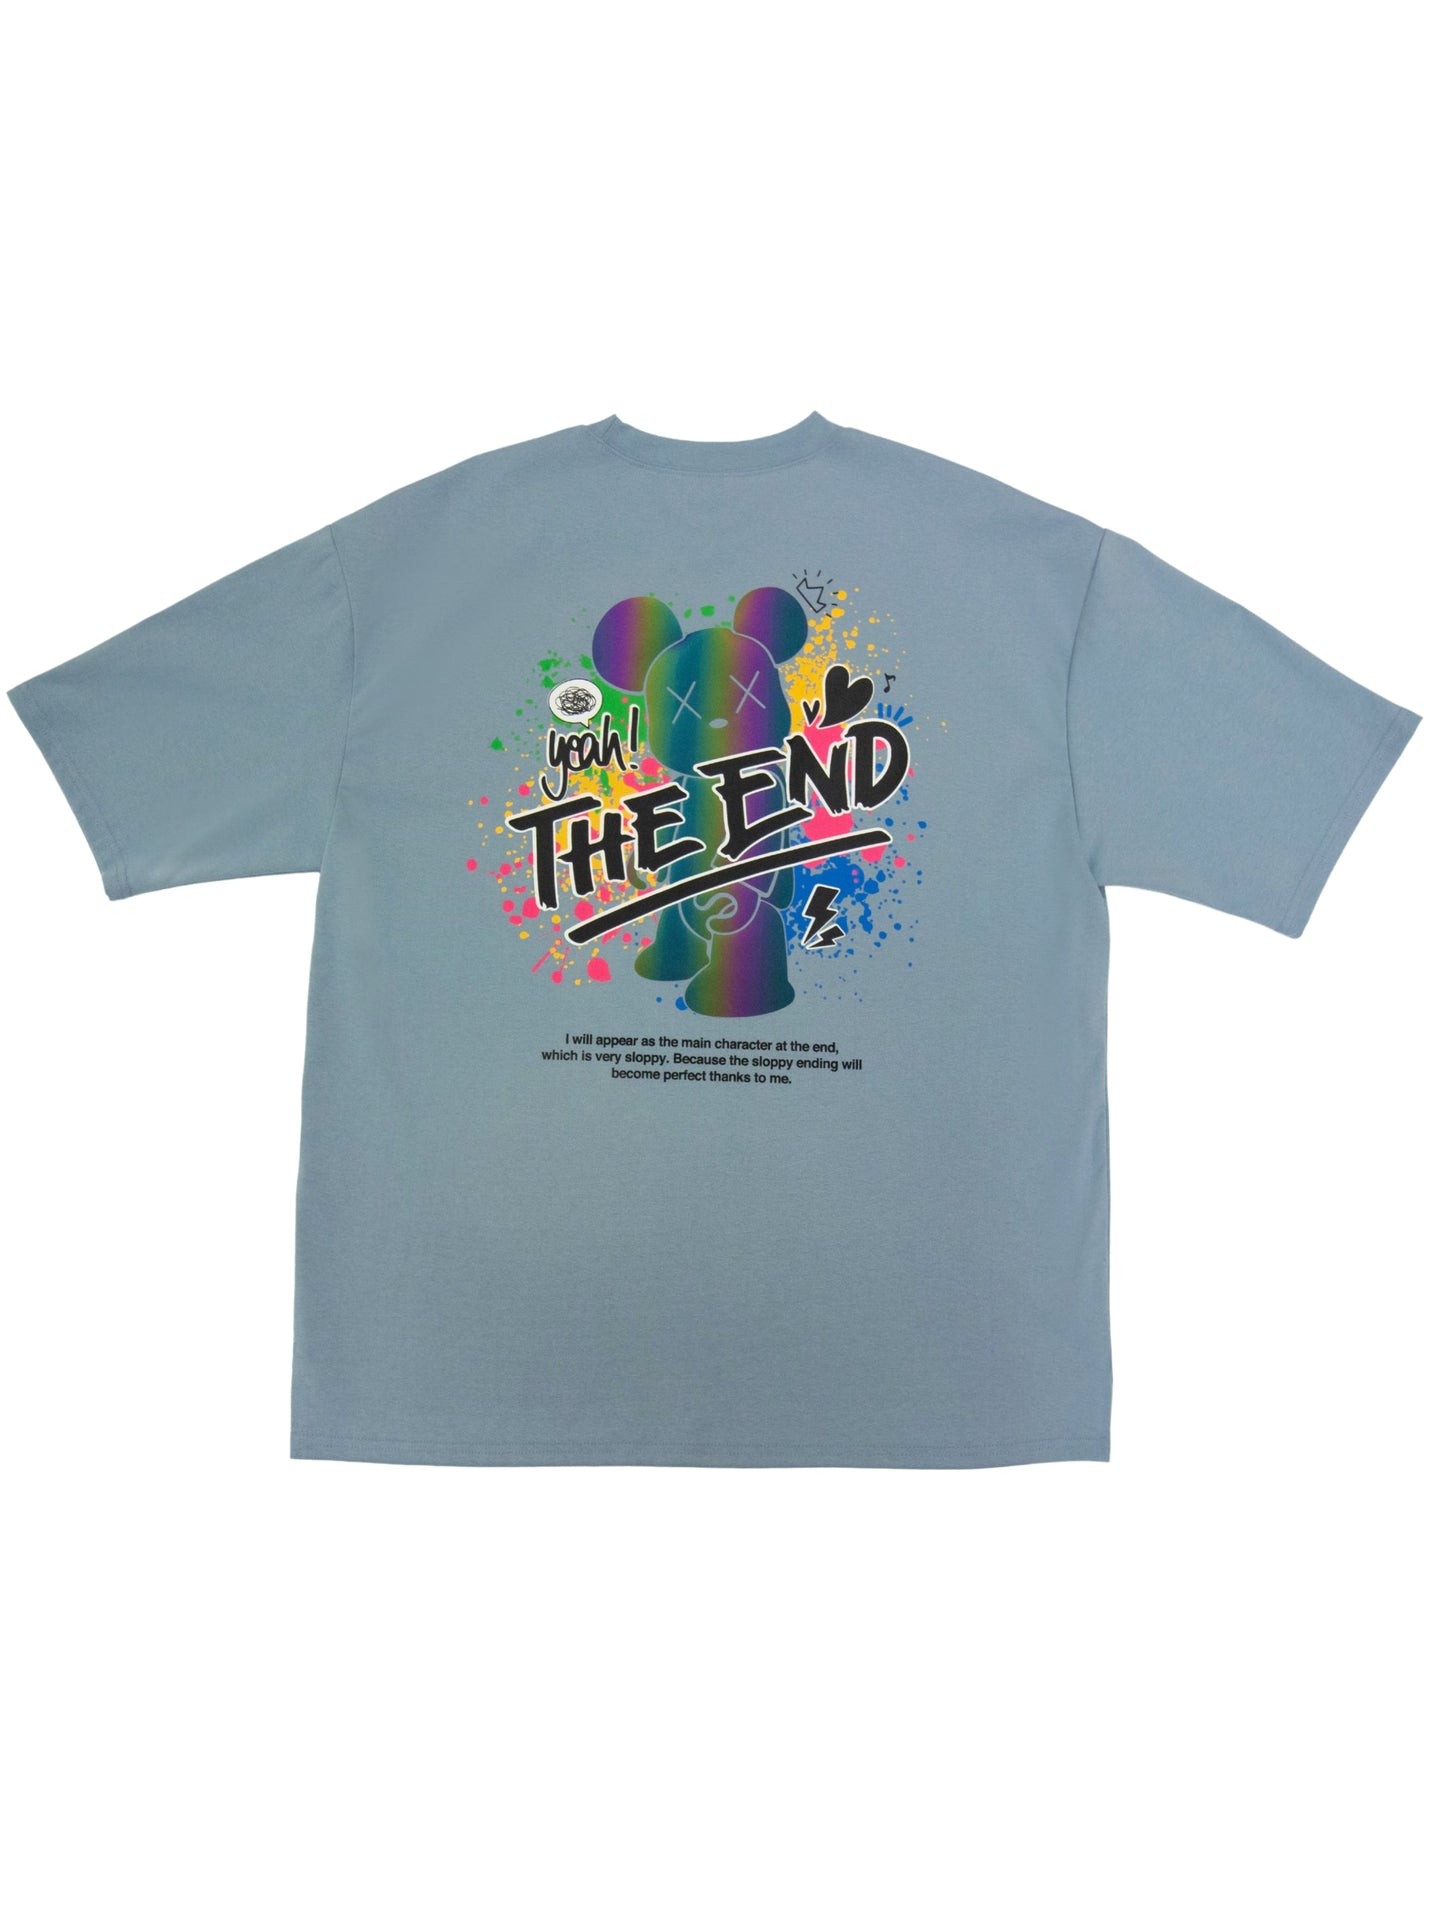 M-The End T-shirt